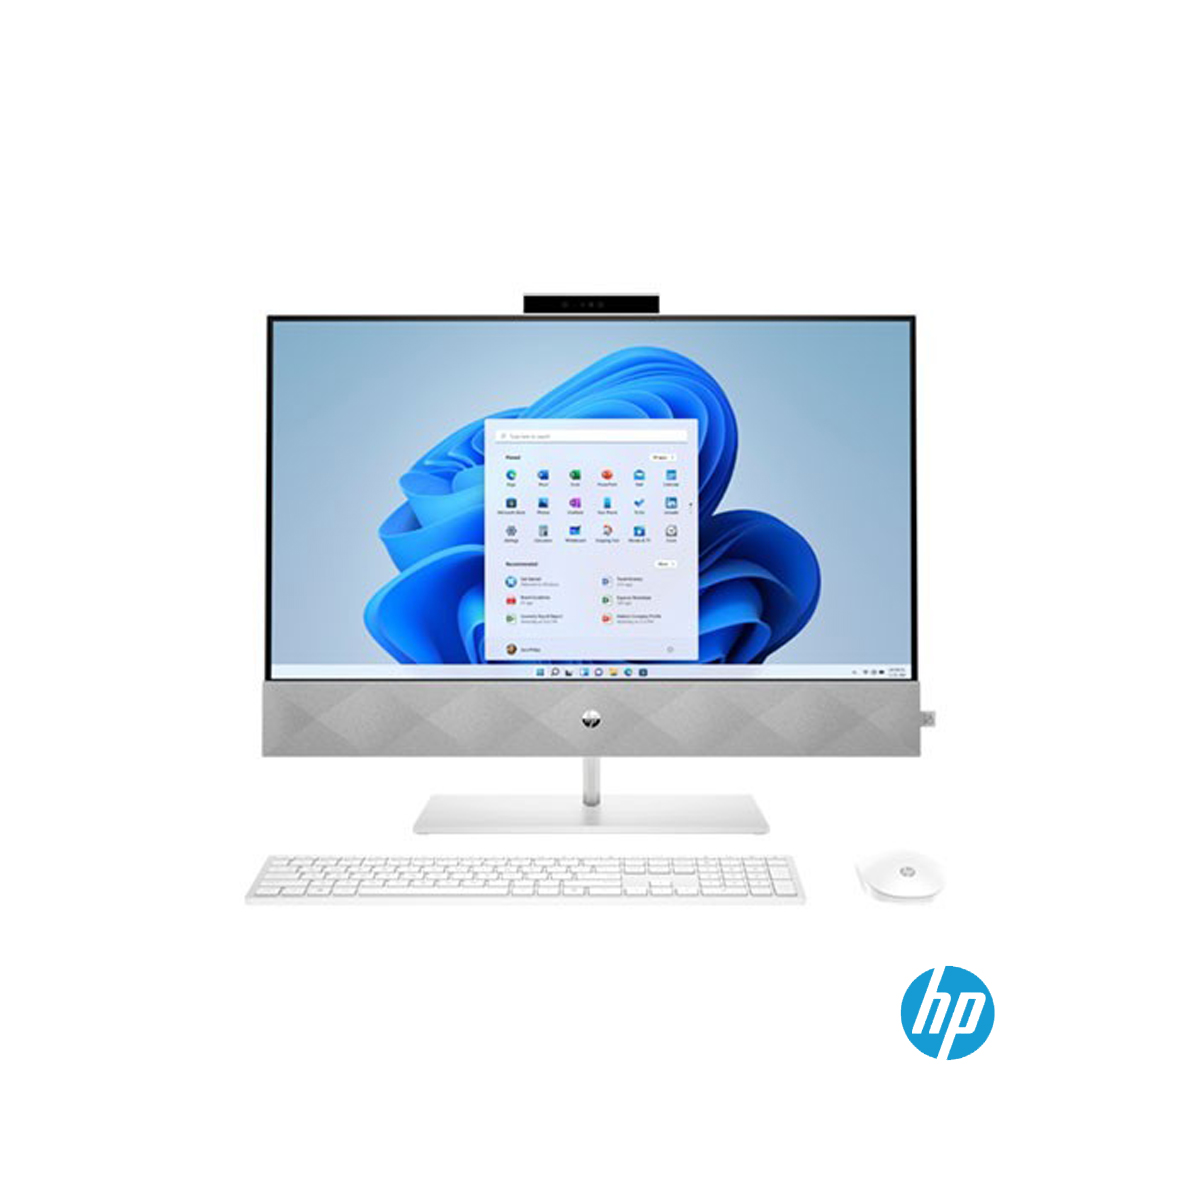 Jual PC All-in-One HP Pavilion 27-ca1000d-643J8PA Intel Core i7 12700T 16GB 512GB SSD + 2TB HDD NVIDIA GeForce MX450 2GB 27 inch FHD Touchscreen Windows 11 Office Home Student WHITE di Denpasar Bali